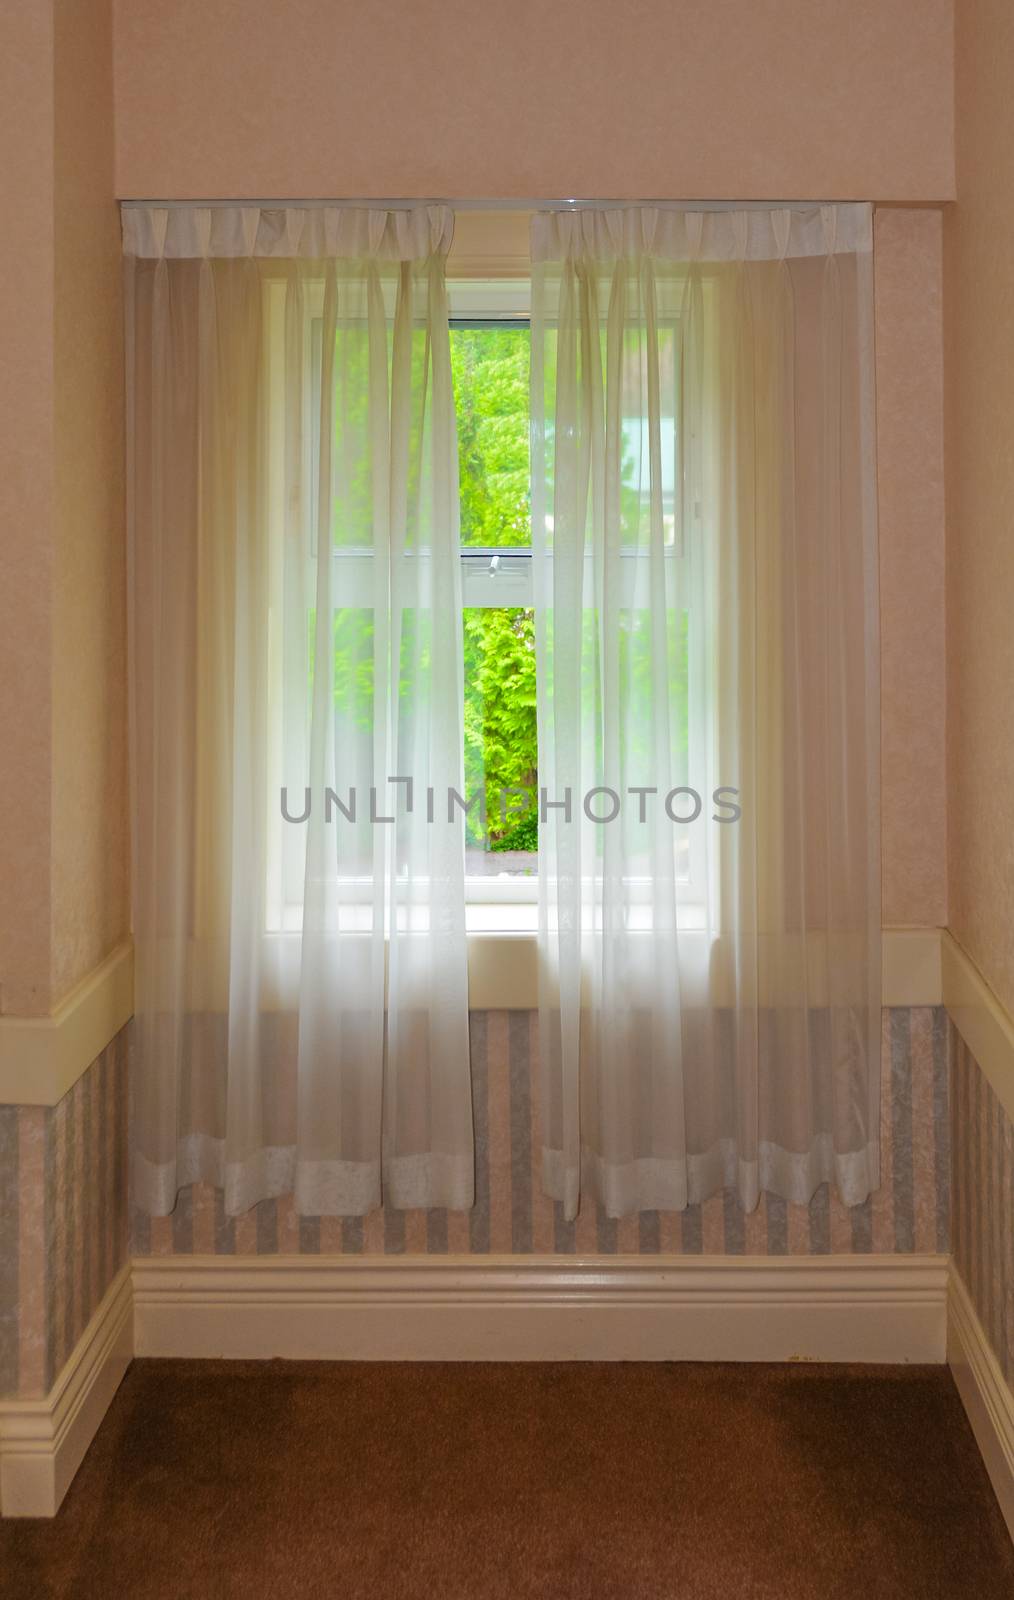 Semi transparent valance on a window in a house